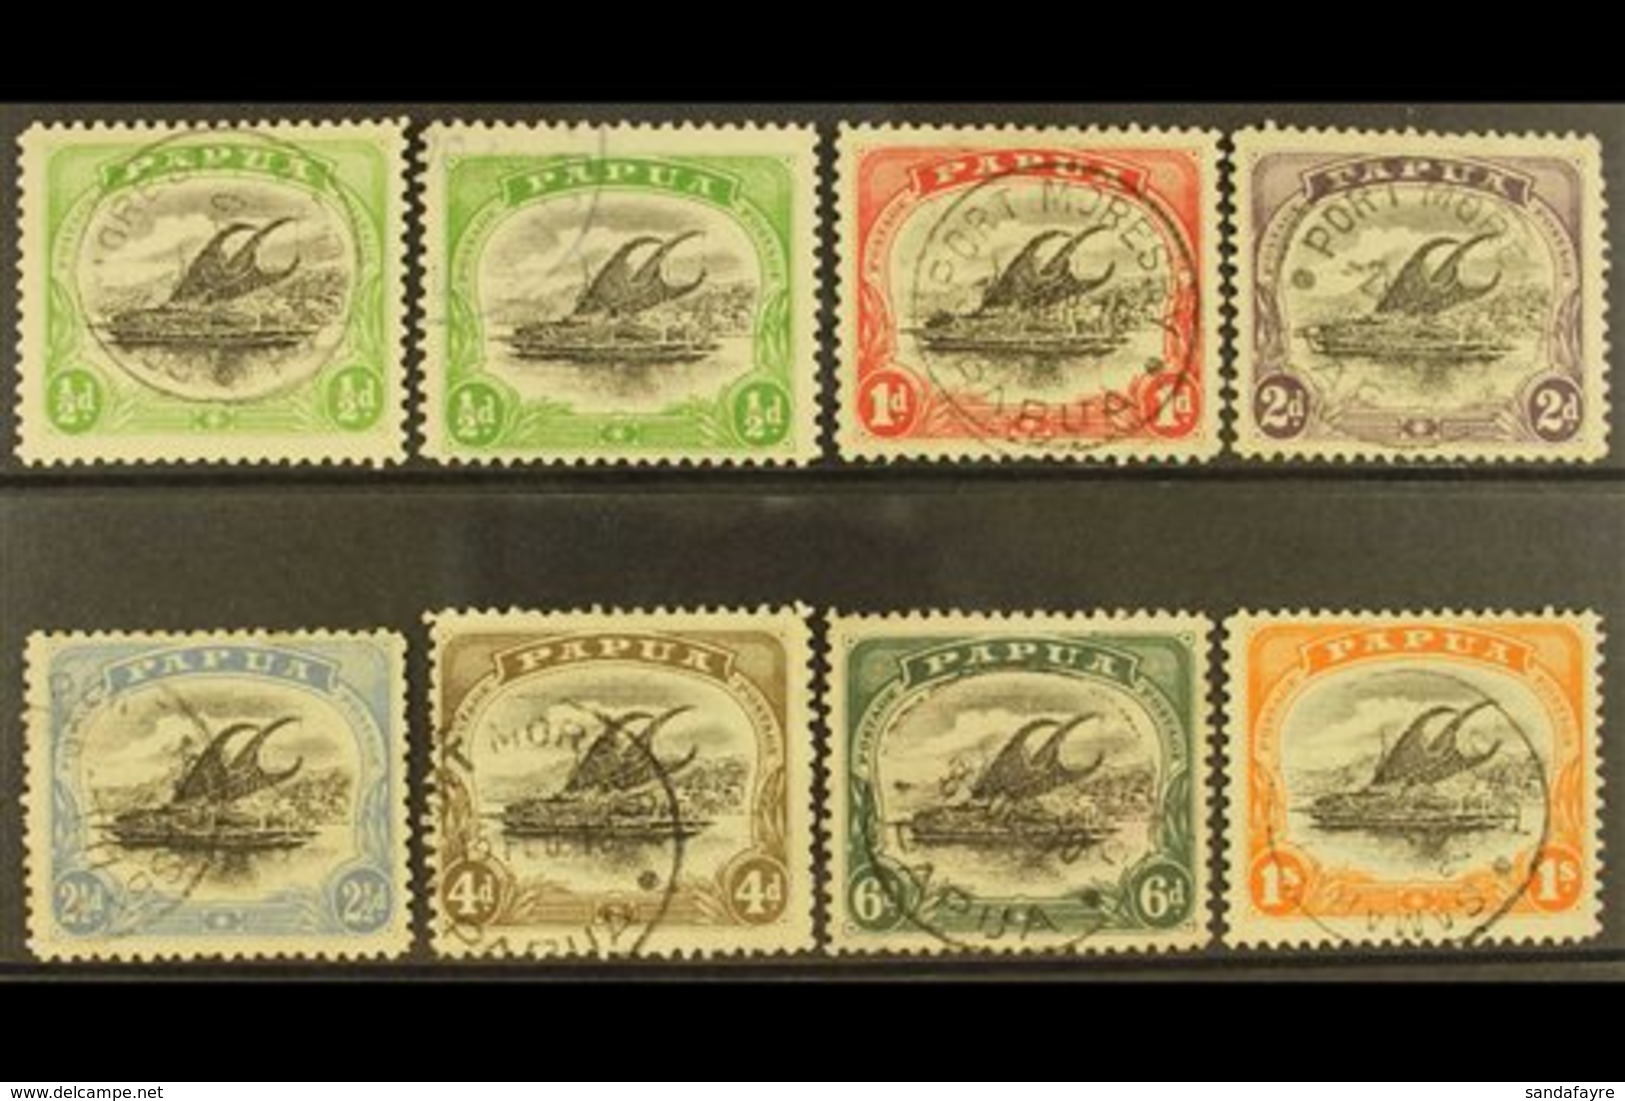 1909-10 Lakatoi Watermark Sideways, Perf 11 Set With Both ½d Shades, SG 59/65, Fine Cds Used. (8) For More Images, Pleas - Papua New Guinea